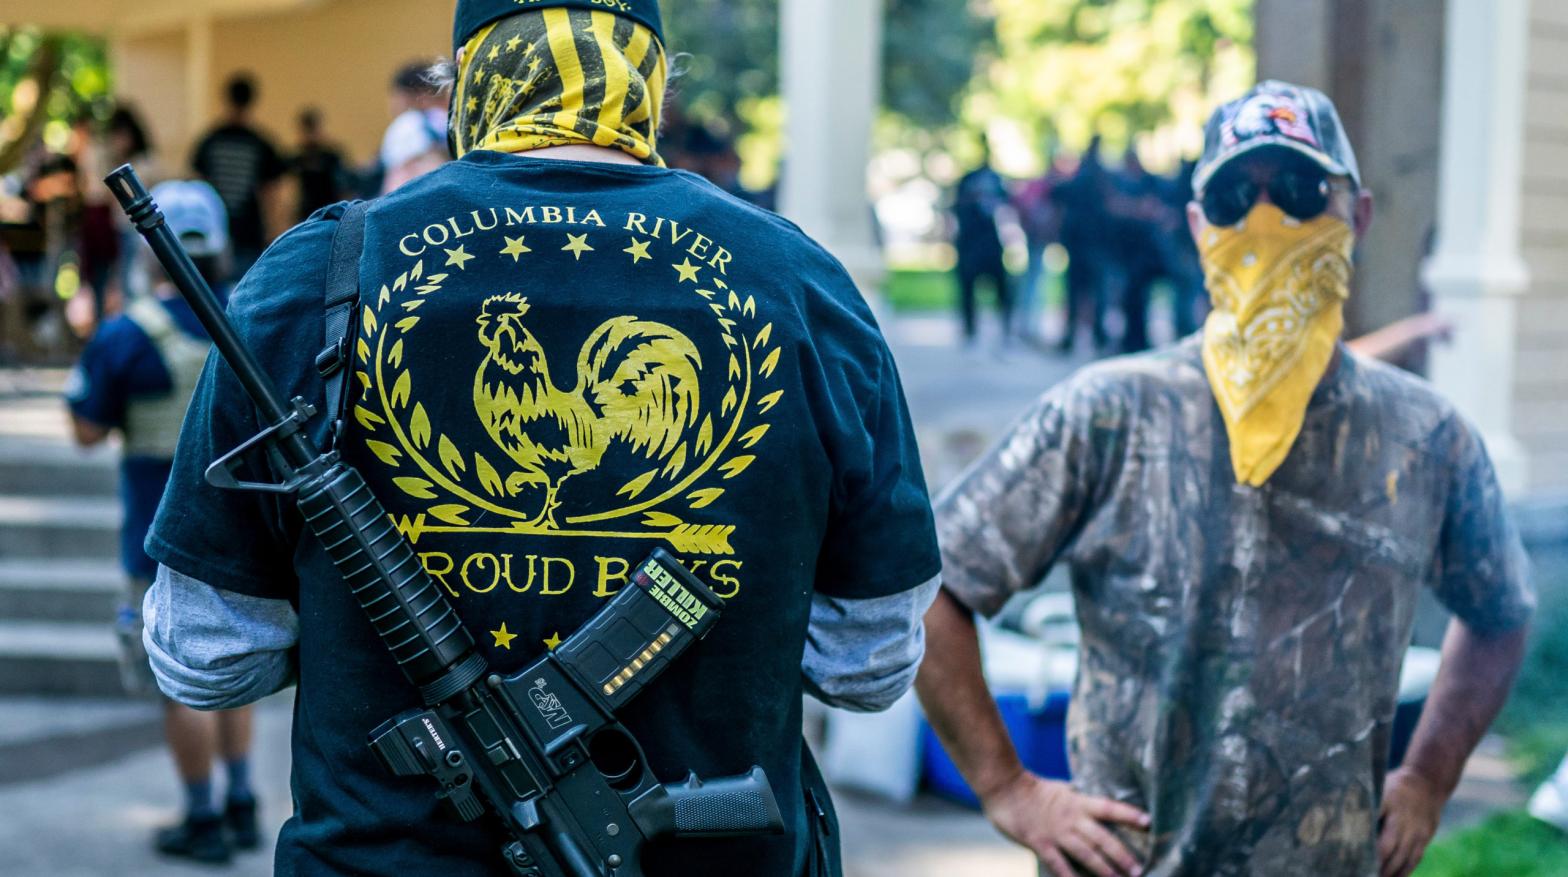 Armed Proud Boys at an Sept. 5 rally in Vancouver, Washington. (Photo: Nathan Howard, Getty Images)